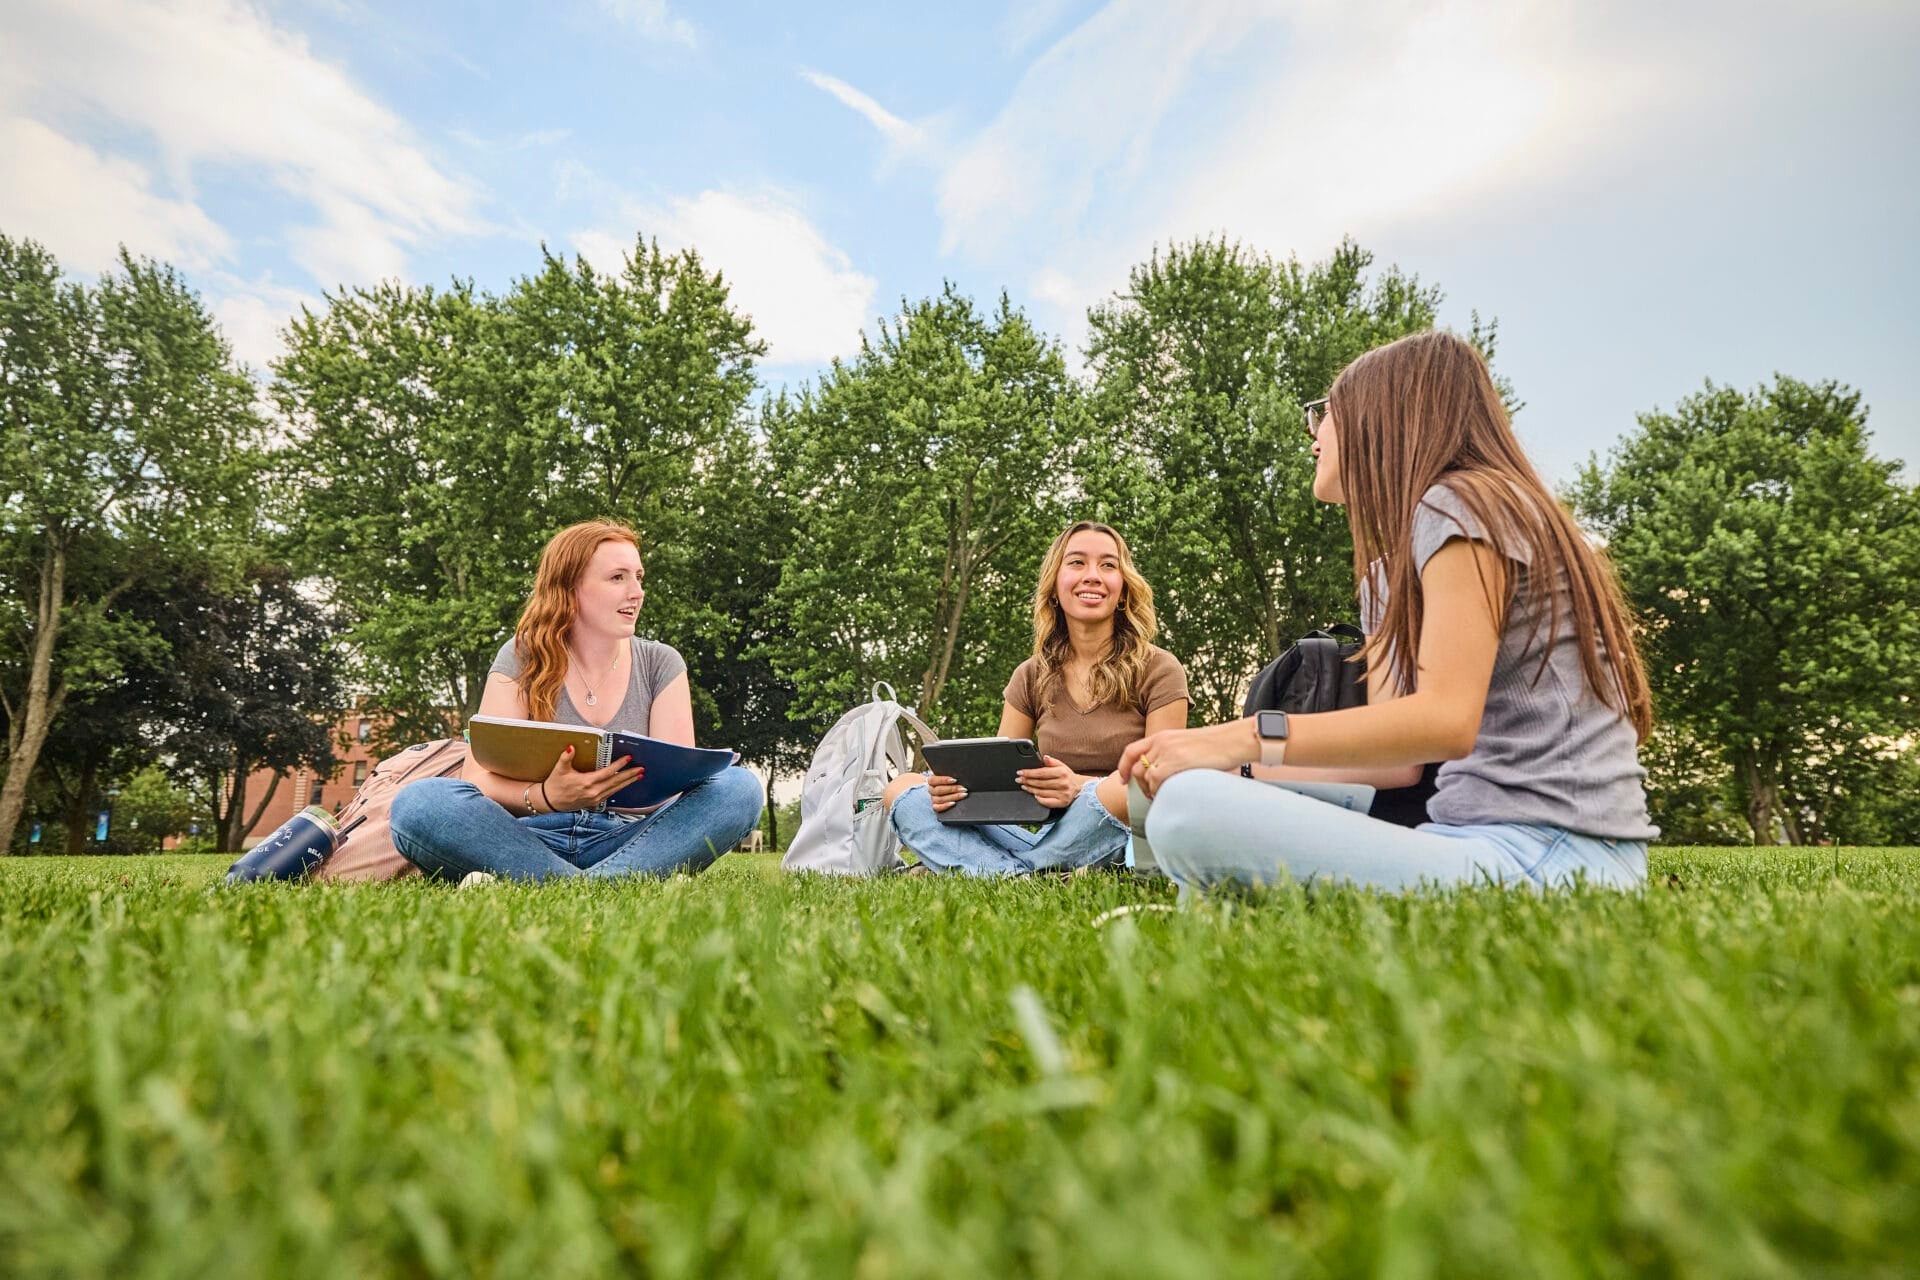 Students sitting in grass studying together